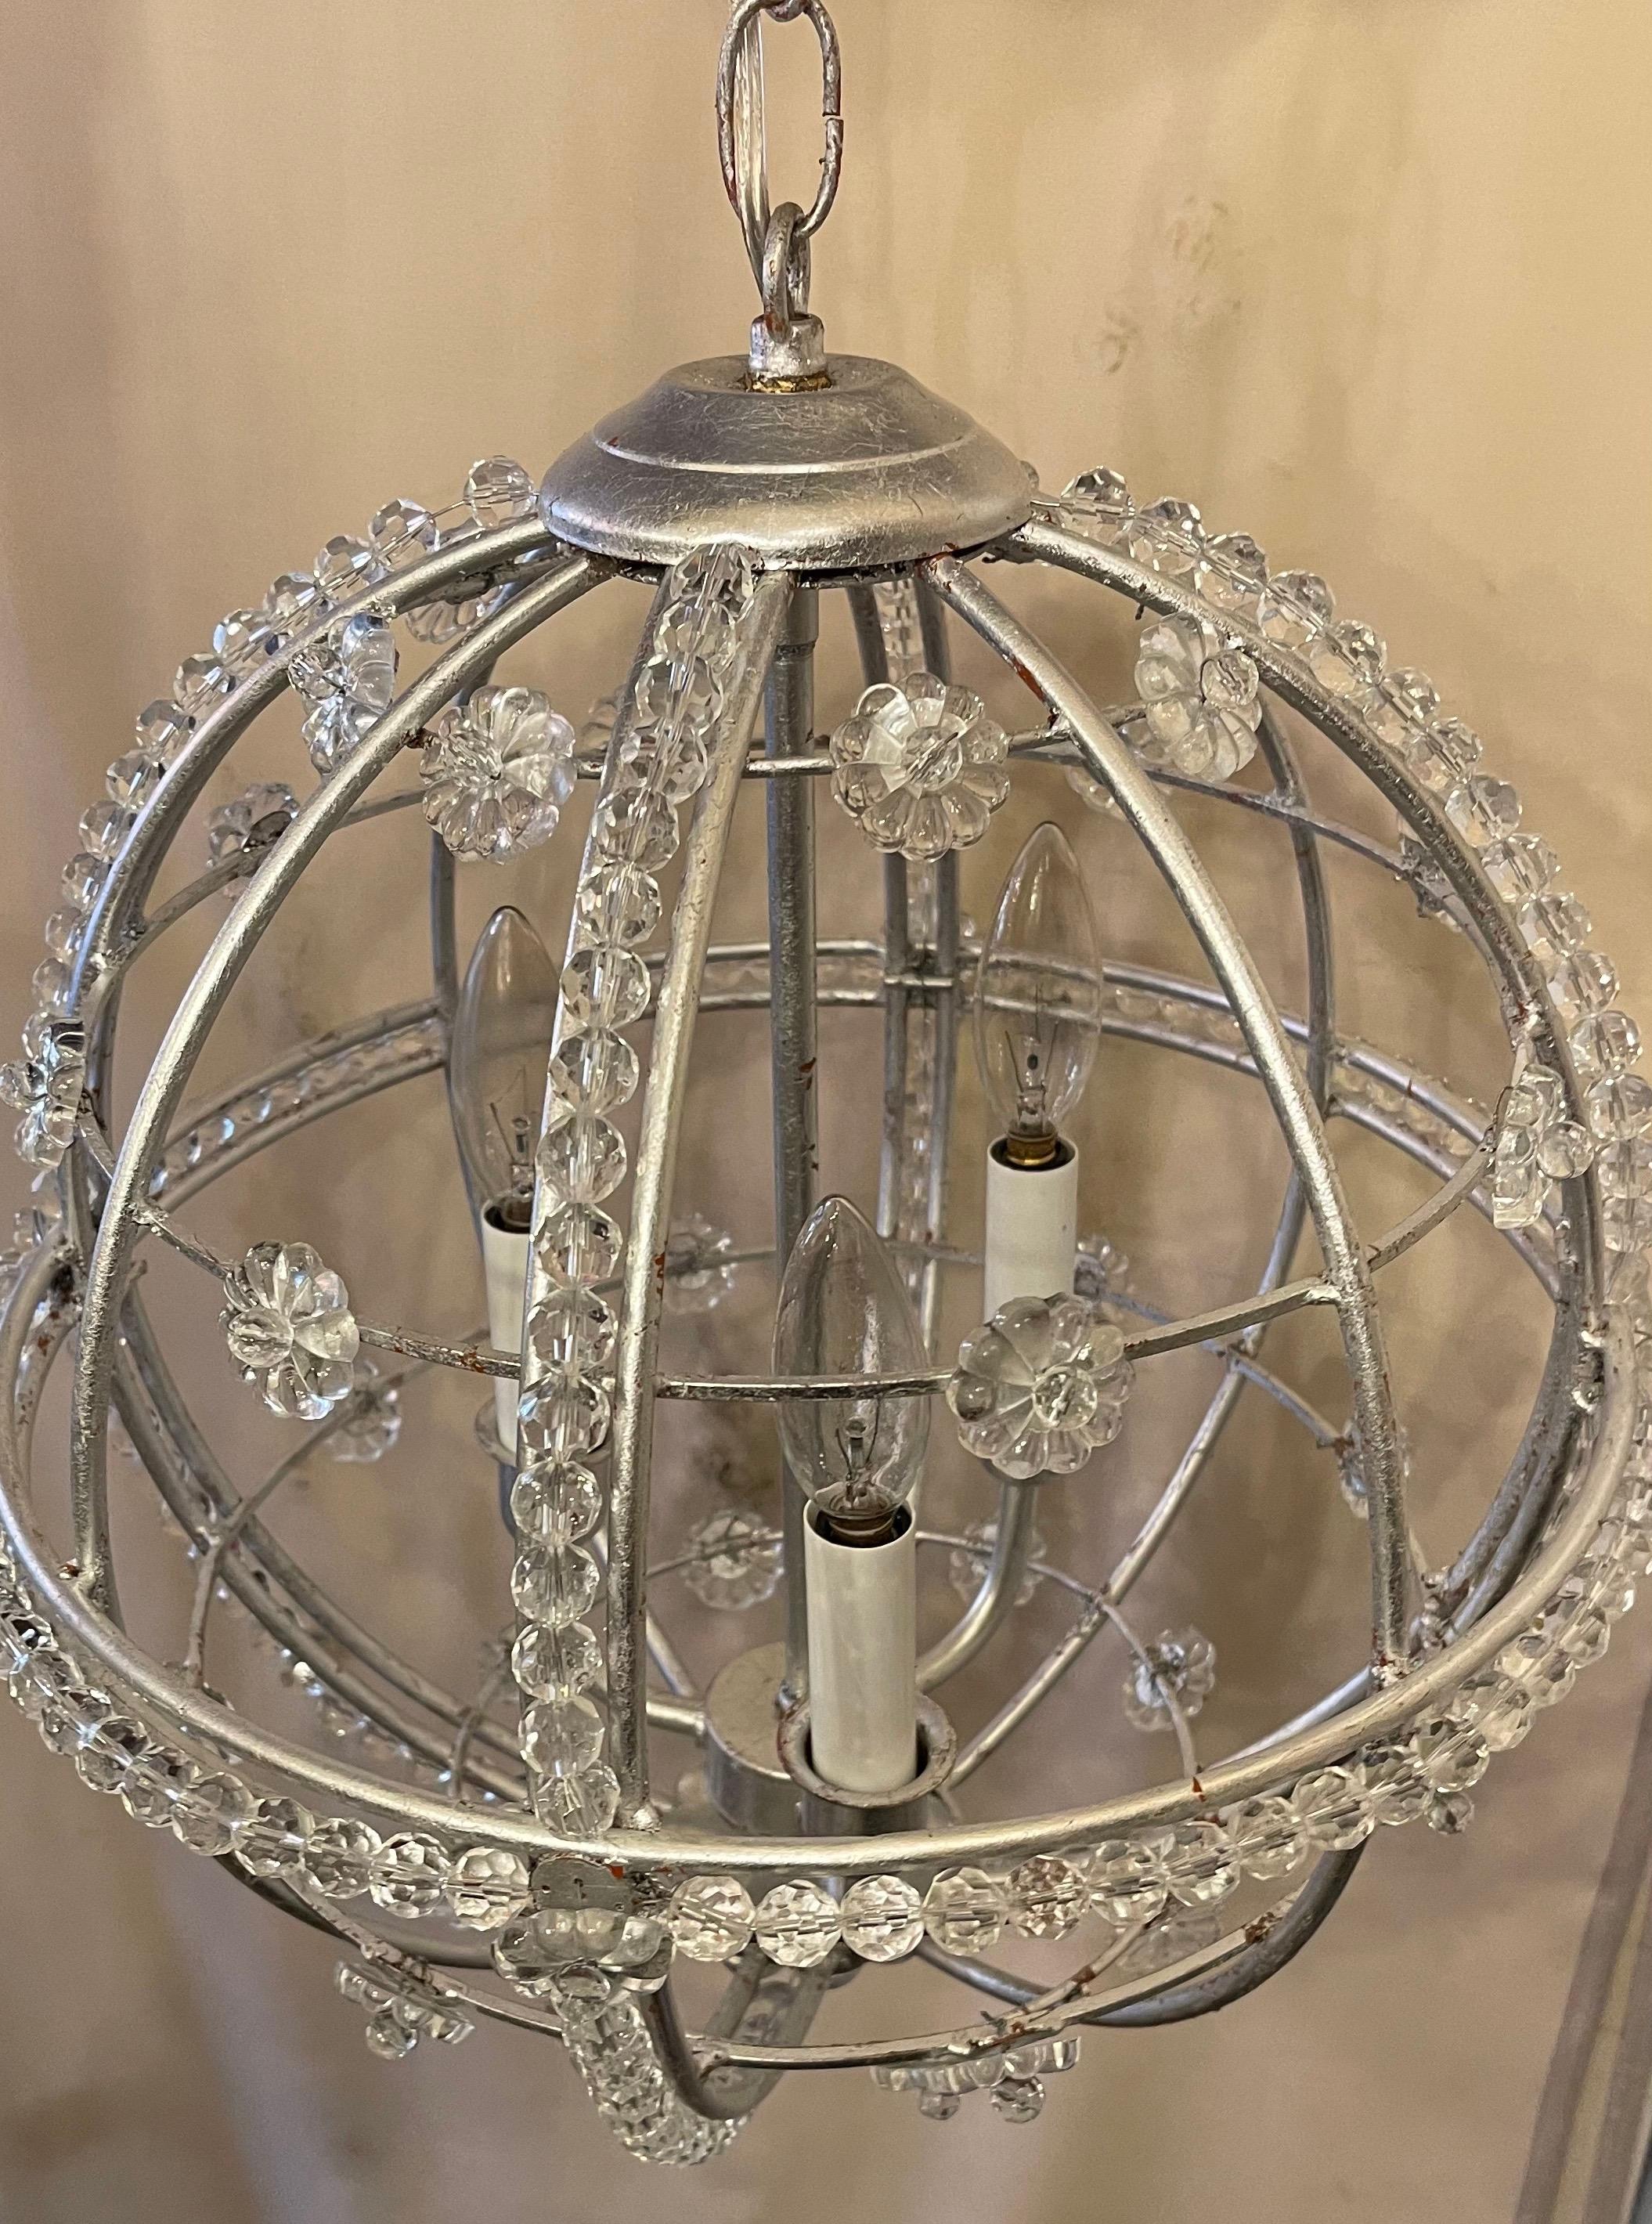 A wonderful pair of Mid-Century Modern transitional silver leaf Sputnik ball chandeliers, each fixture has 3 candelabra sockets and comes with matching chain and canopy

Each sold separately.